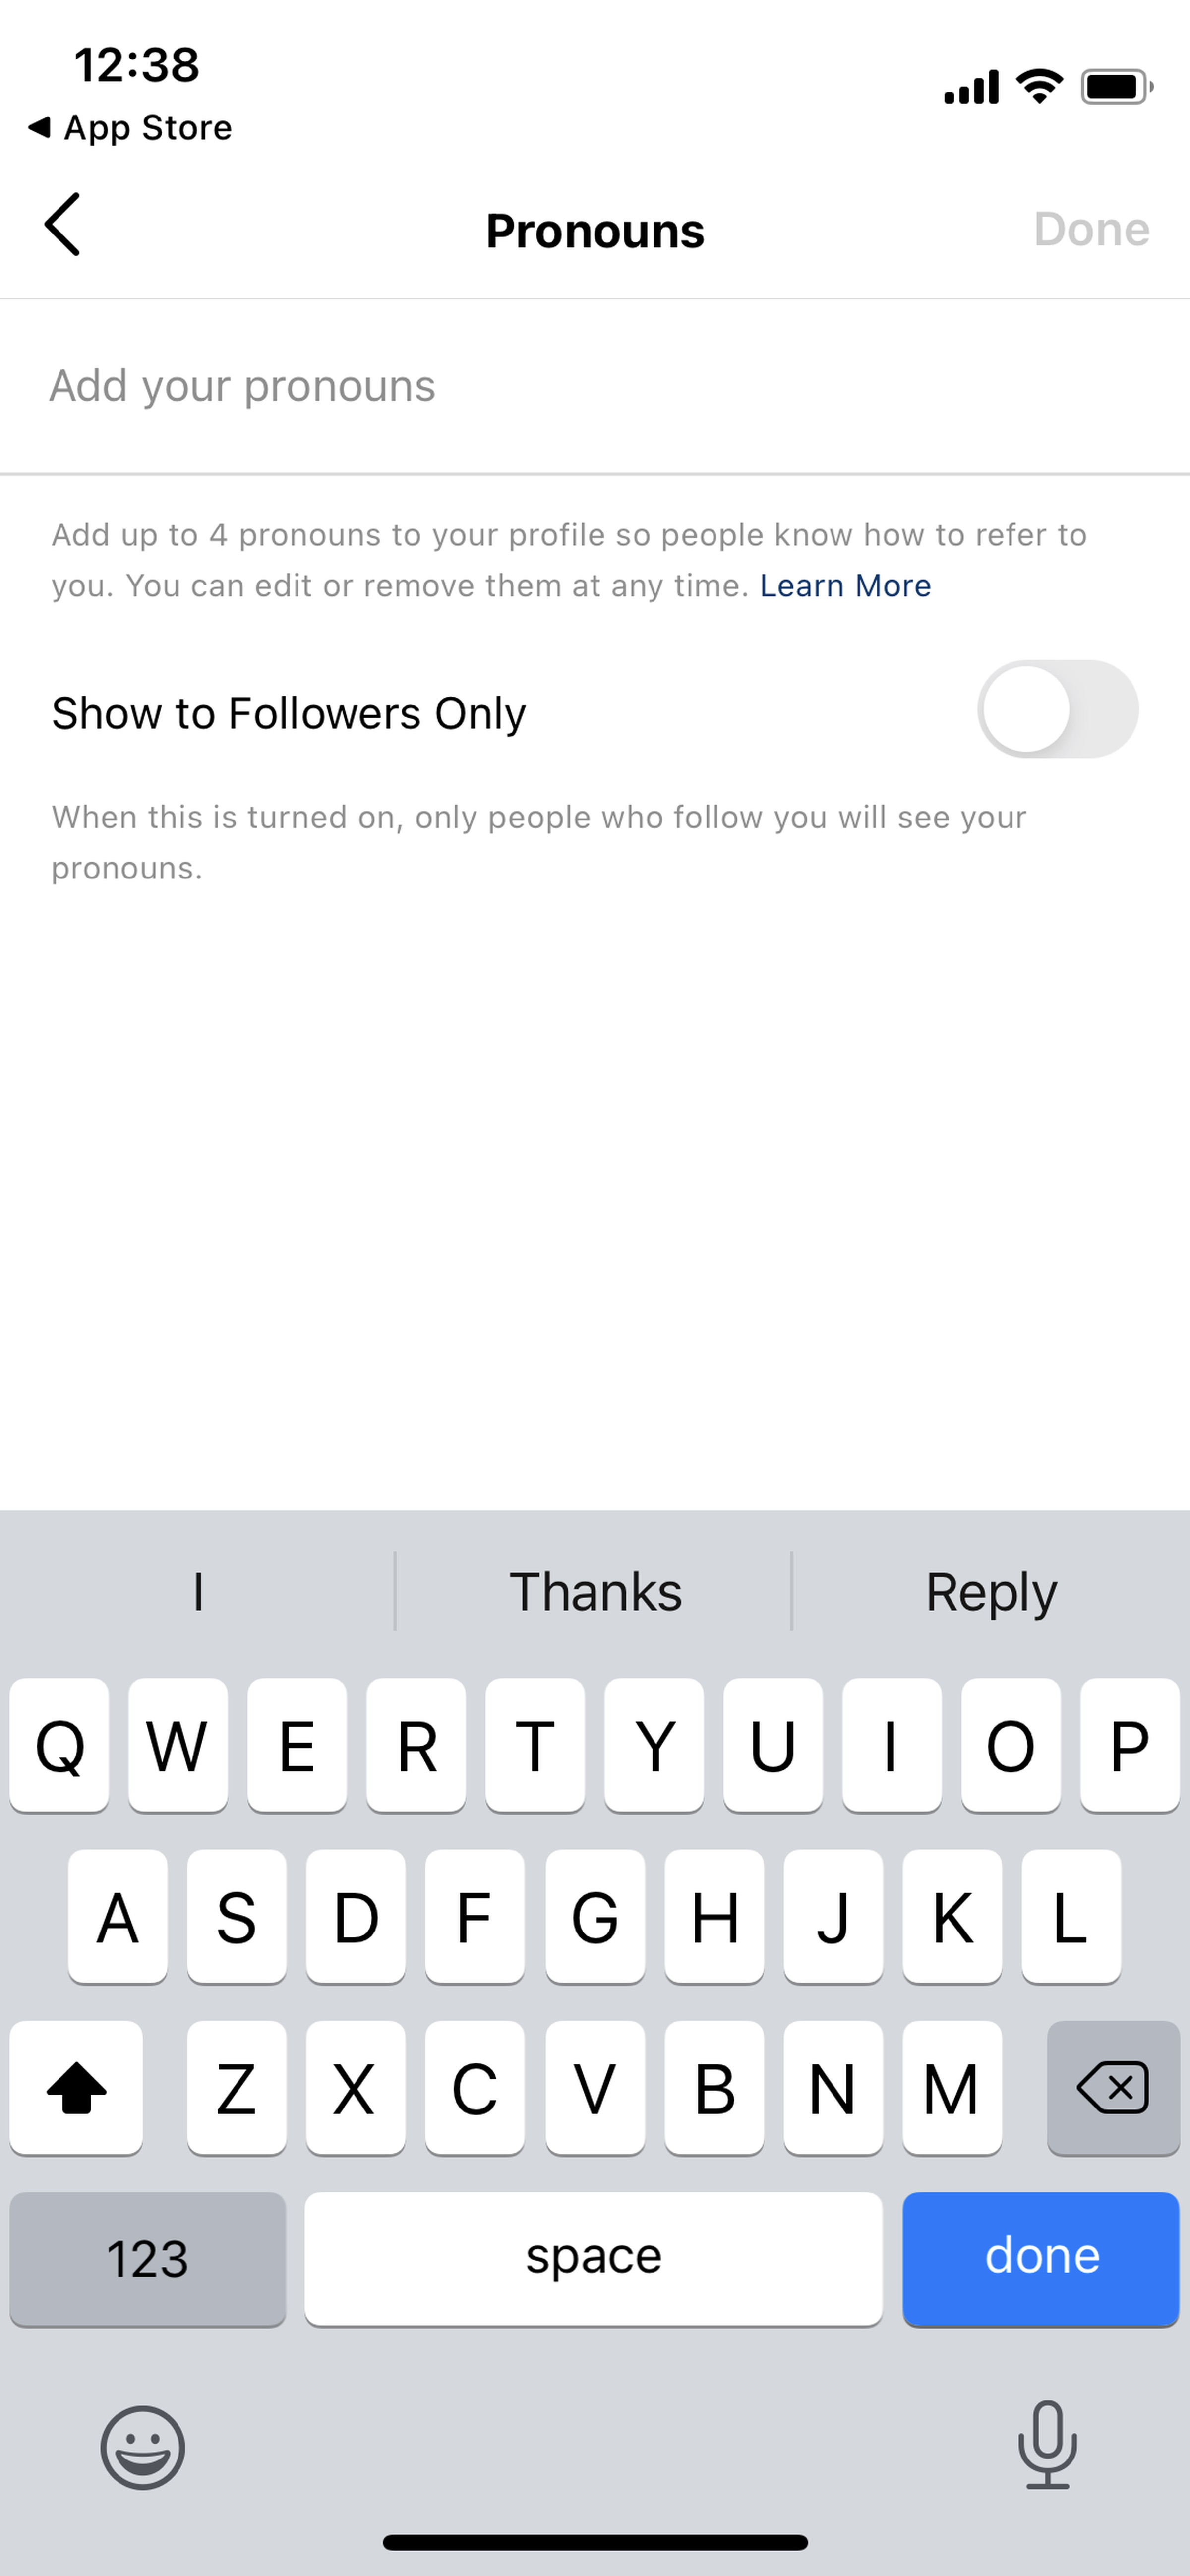 Instagram’s pronoun feature allows users to choose from a set of options to add pronouns to their profile.